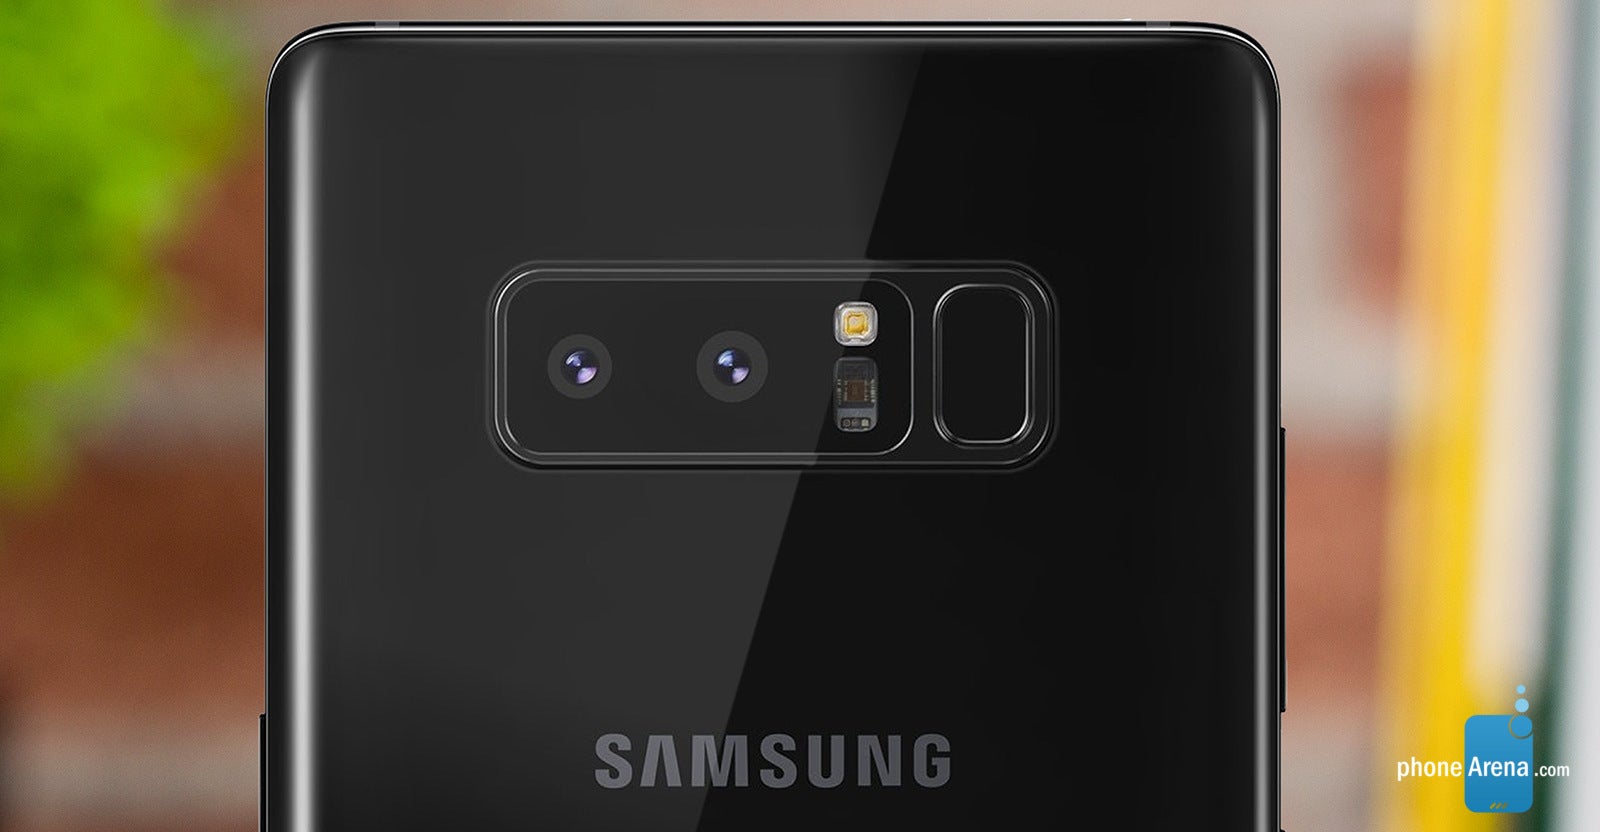 What the Galaxy Note 8 might look like - Samsung Galaxy Note 8 dual camera explained: specs, features, and all rumors we have so far